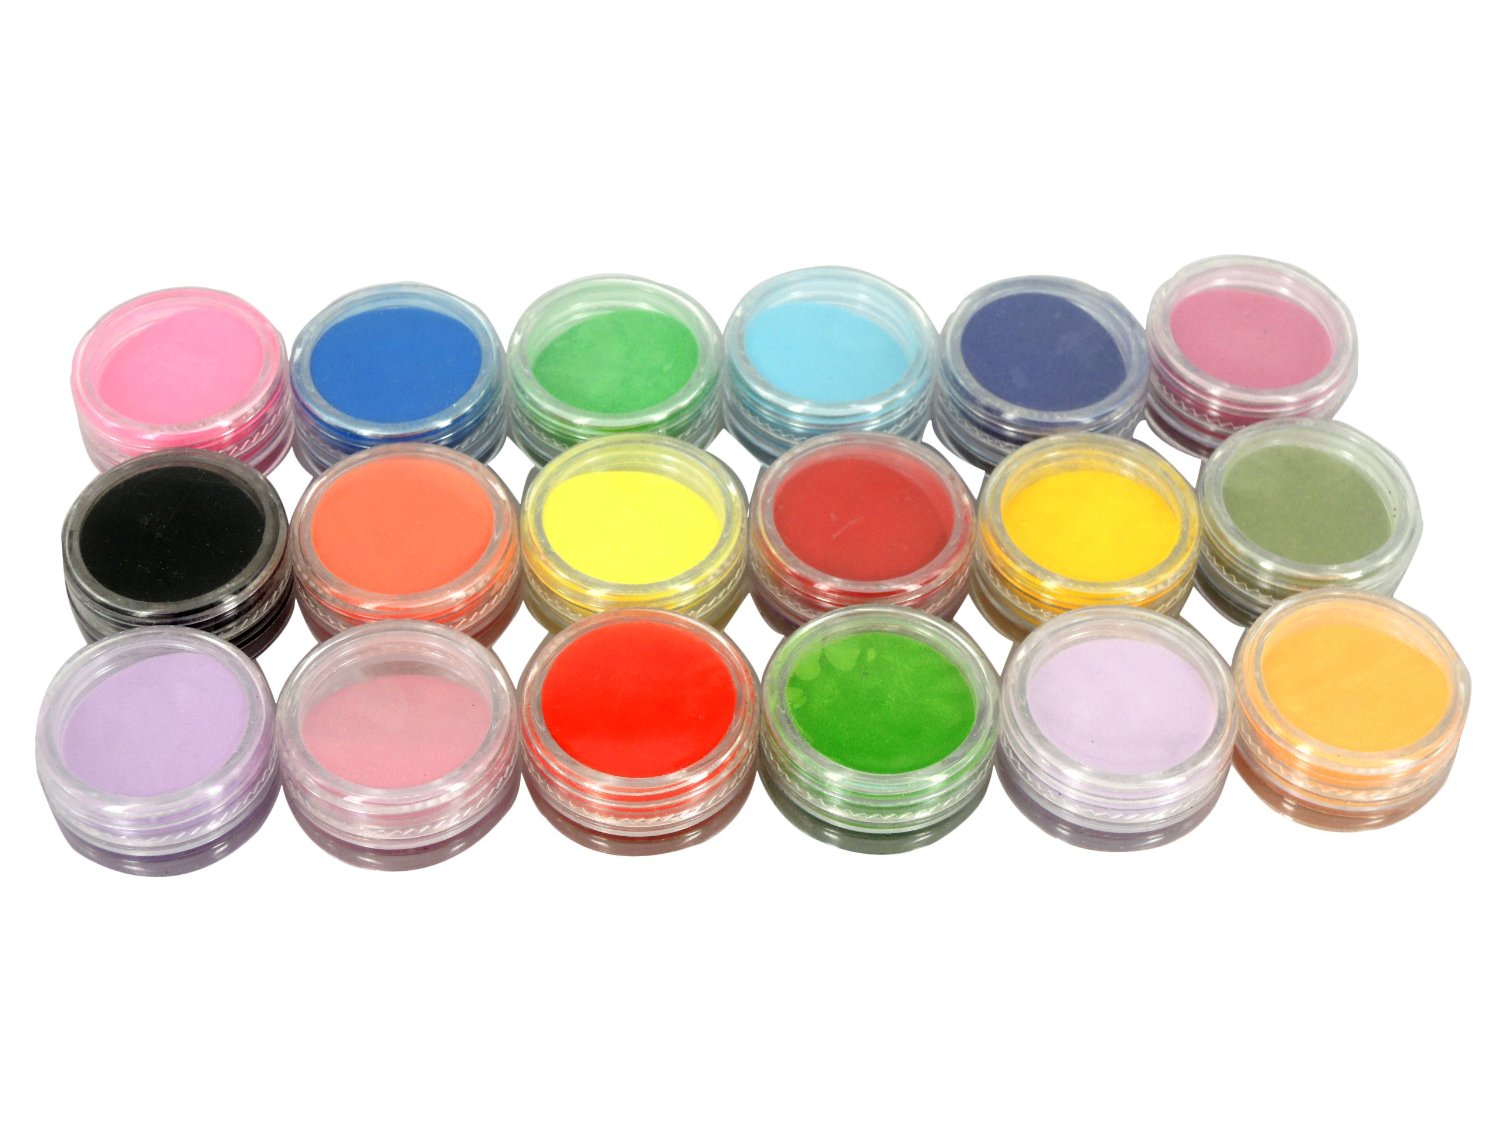 9. Glow in the Dark Acrylic Nail Supplies - wide 4